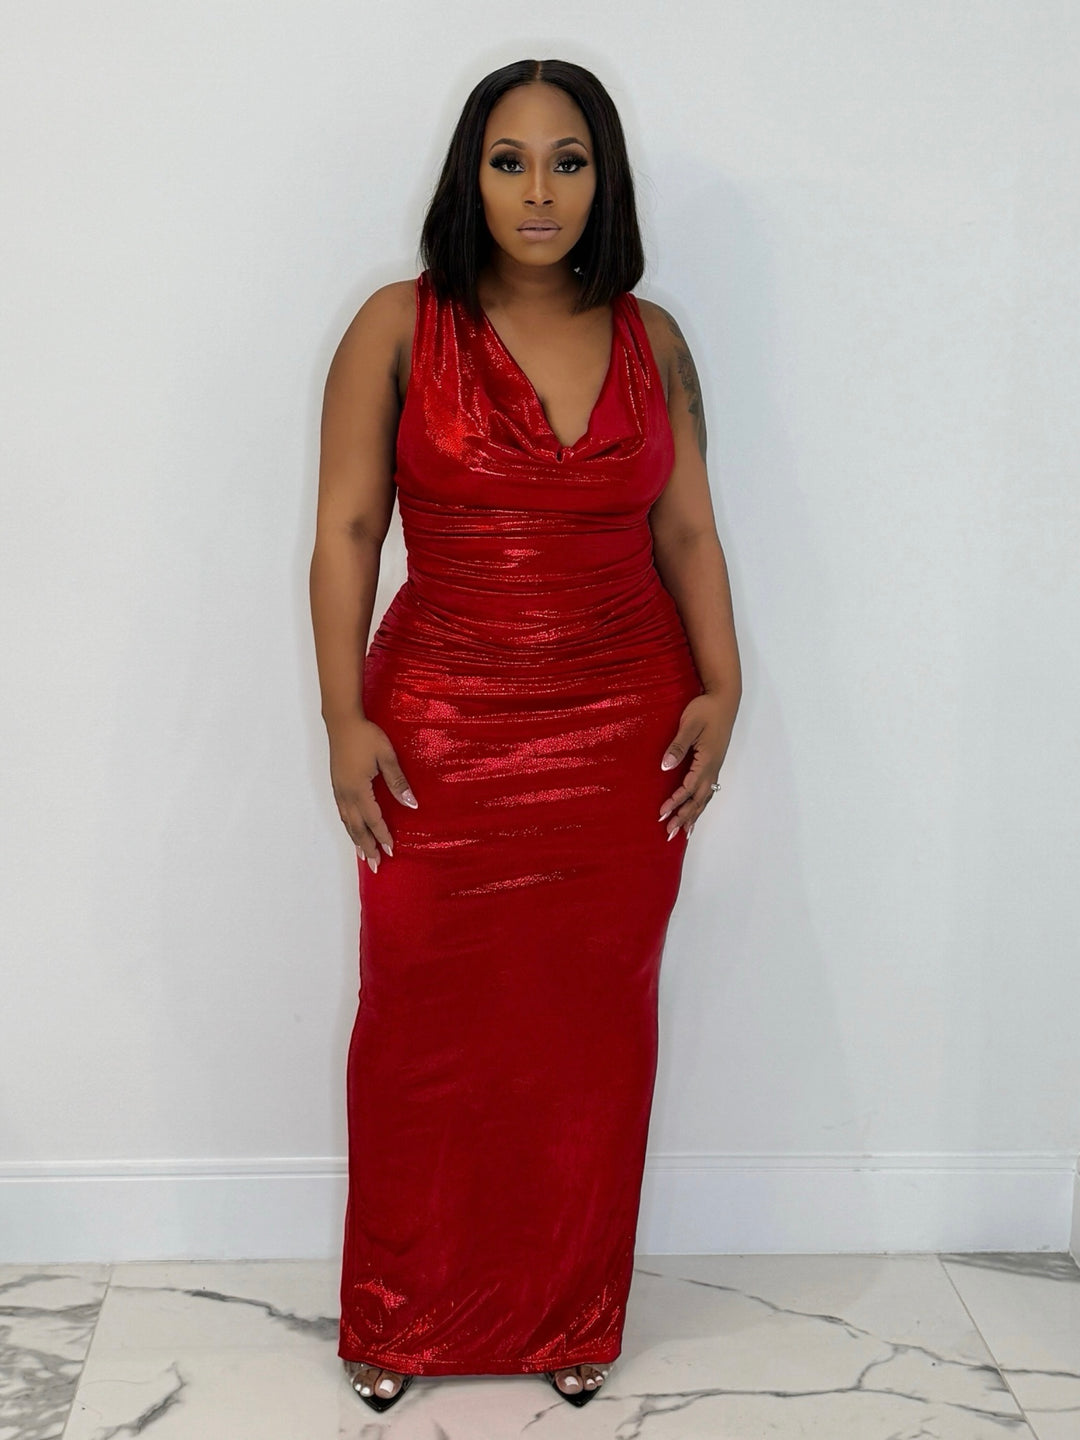 Red Carpet Event Metallic Drape Gown (Red)